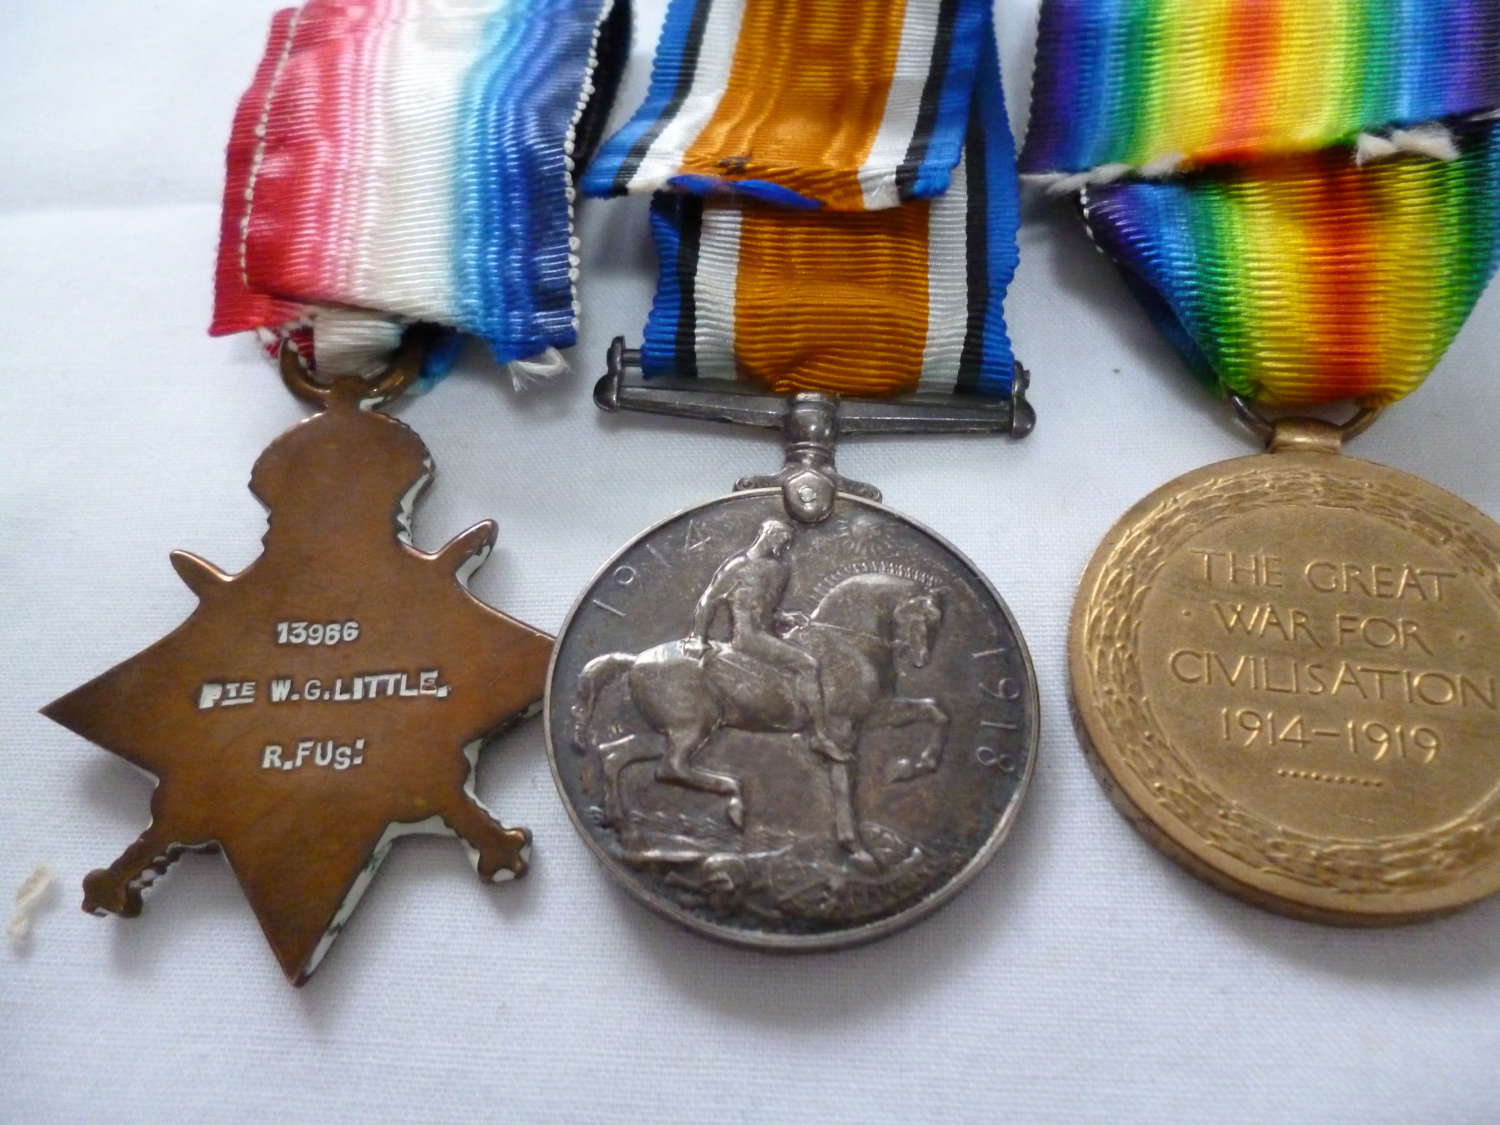 1914-15 Star Casualty Trio. Royal Fusiliers